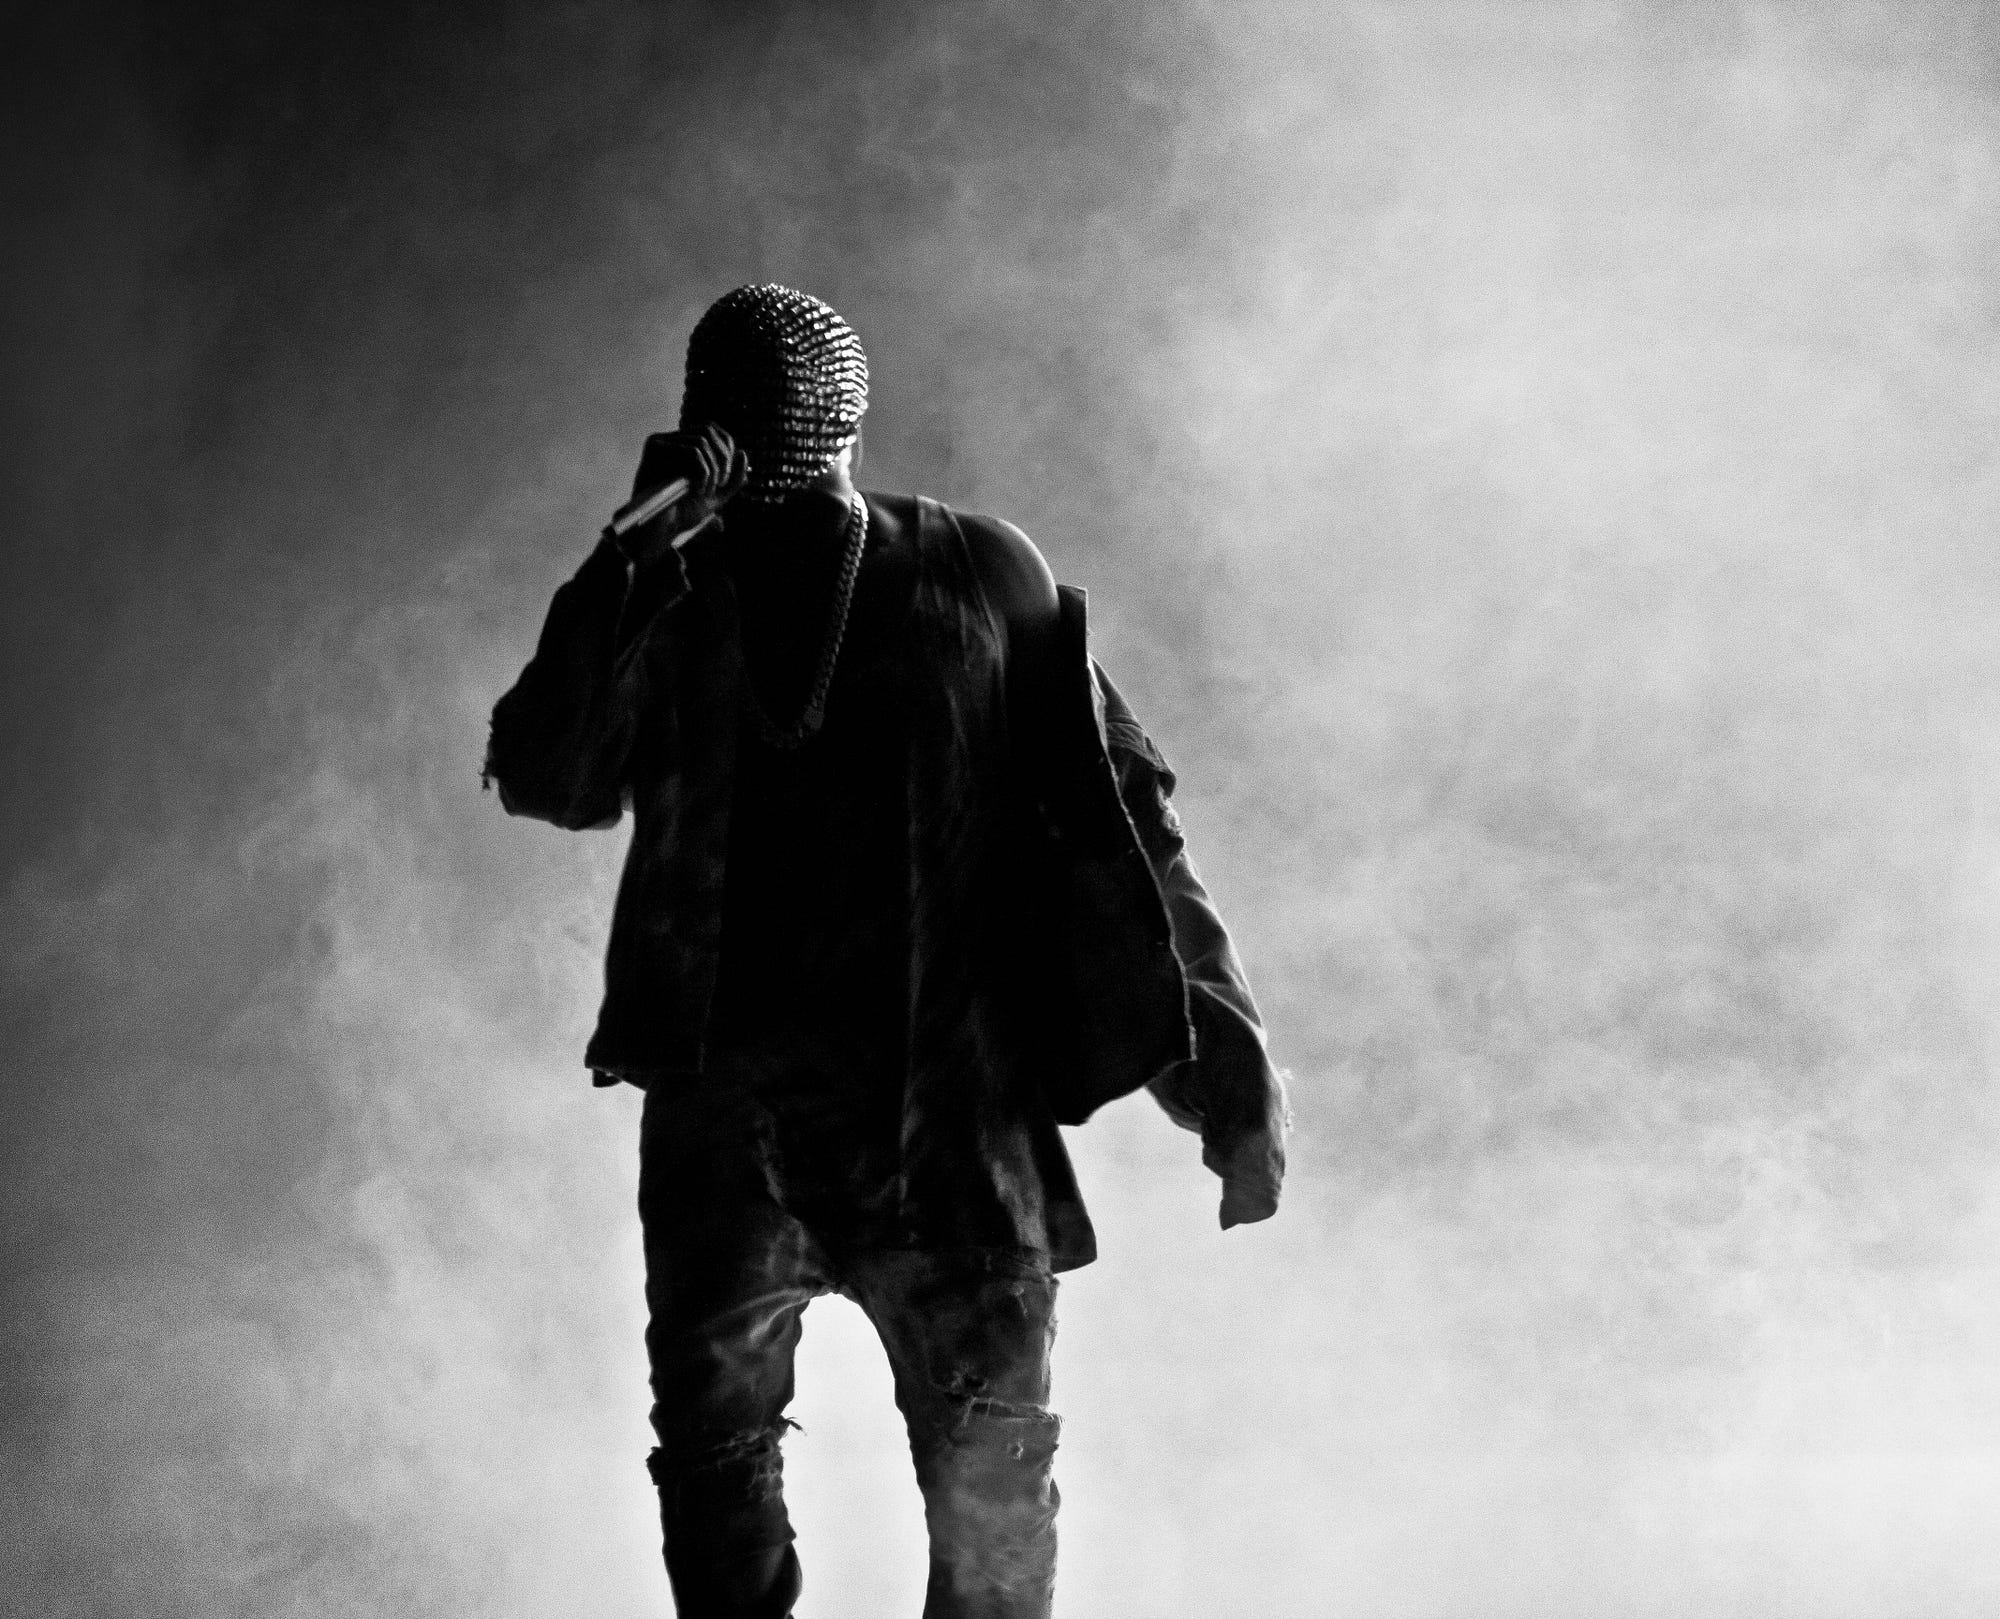 Why Kanye West's War Against Record Contracts Could Actually Work